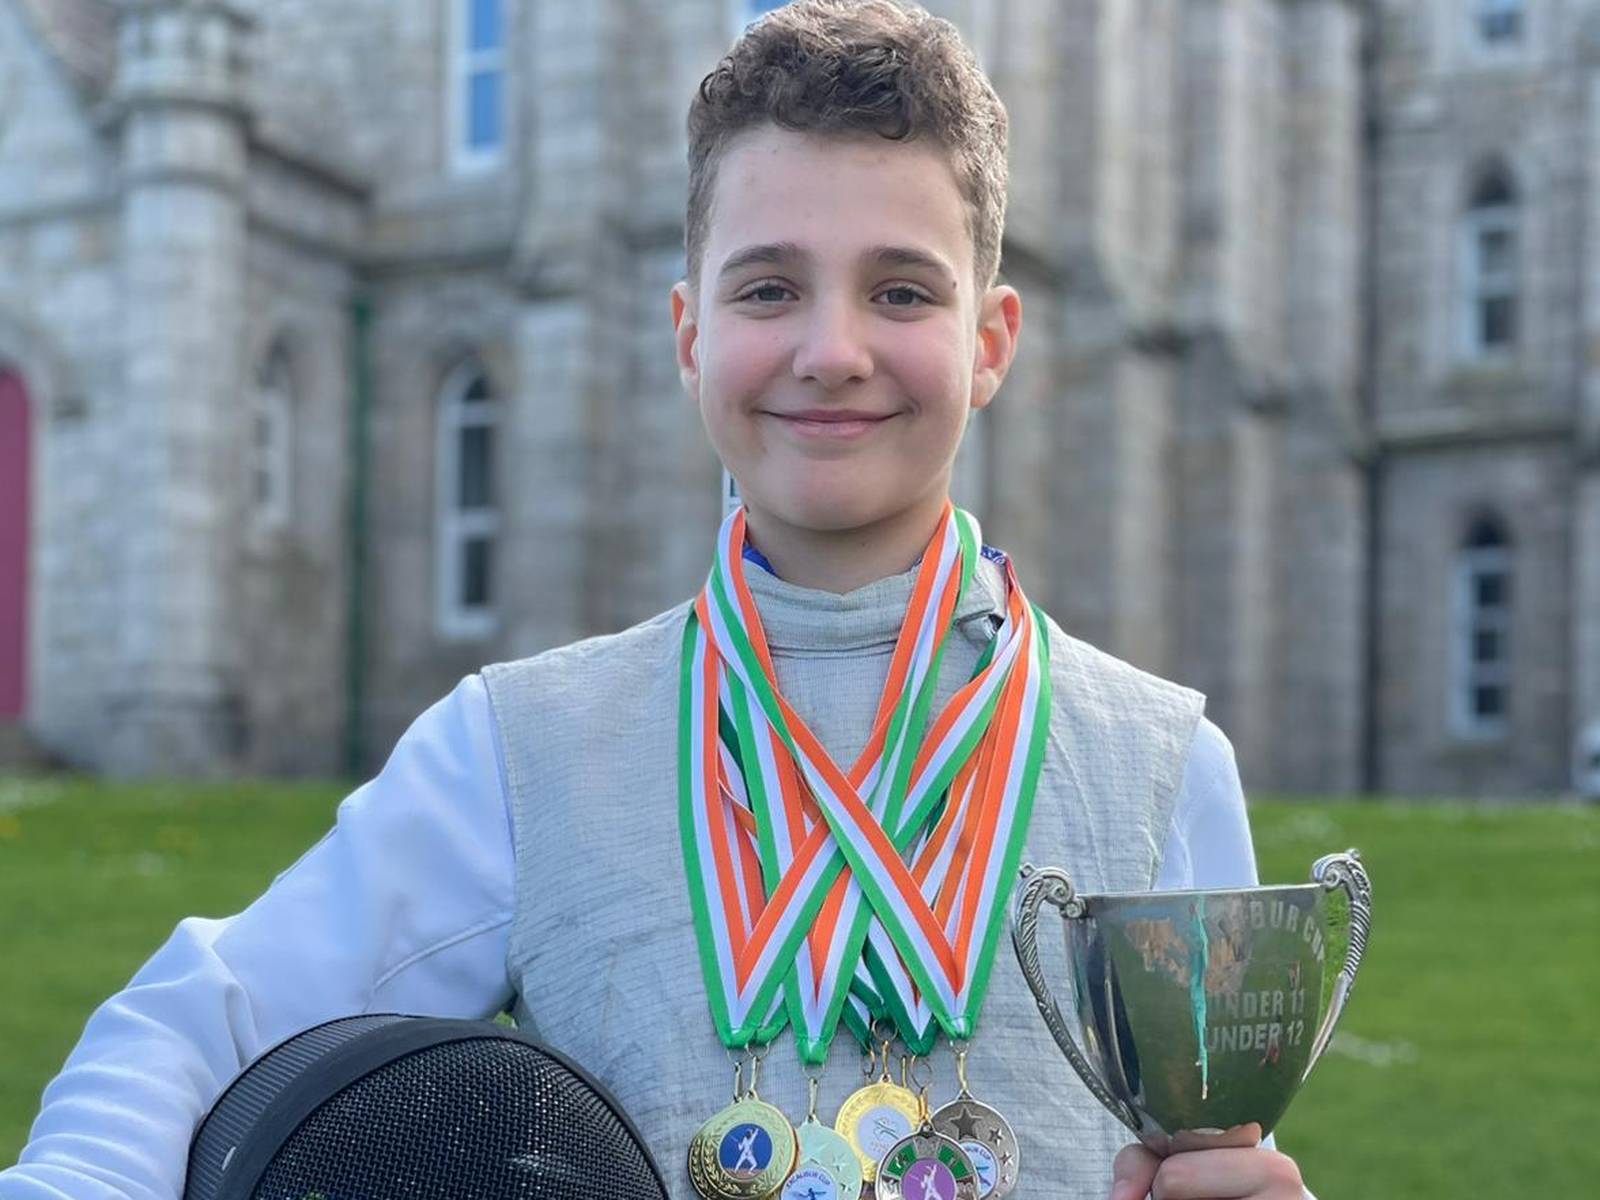 Daniel Karas (11) from Ukraine, with his Irish medals for fencing